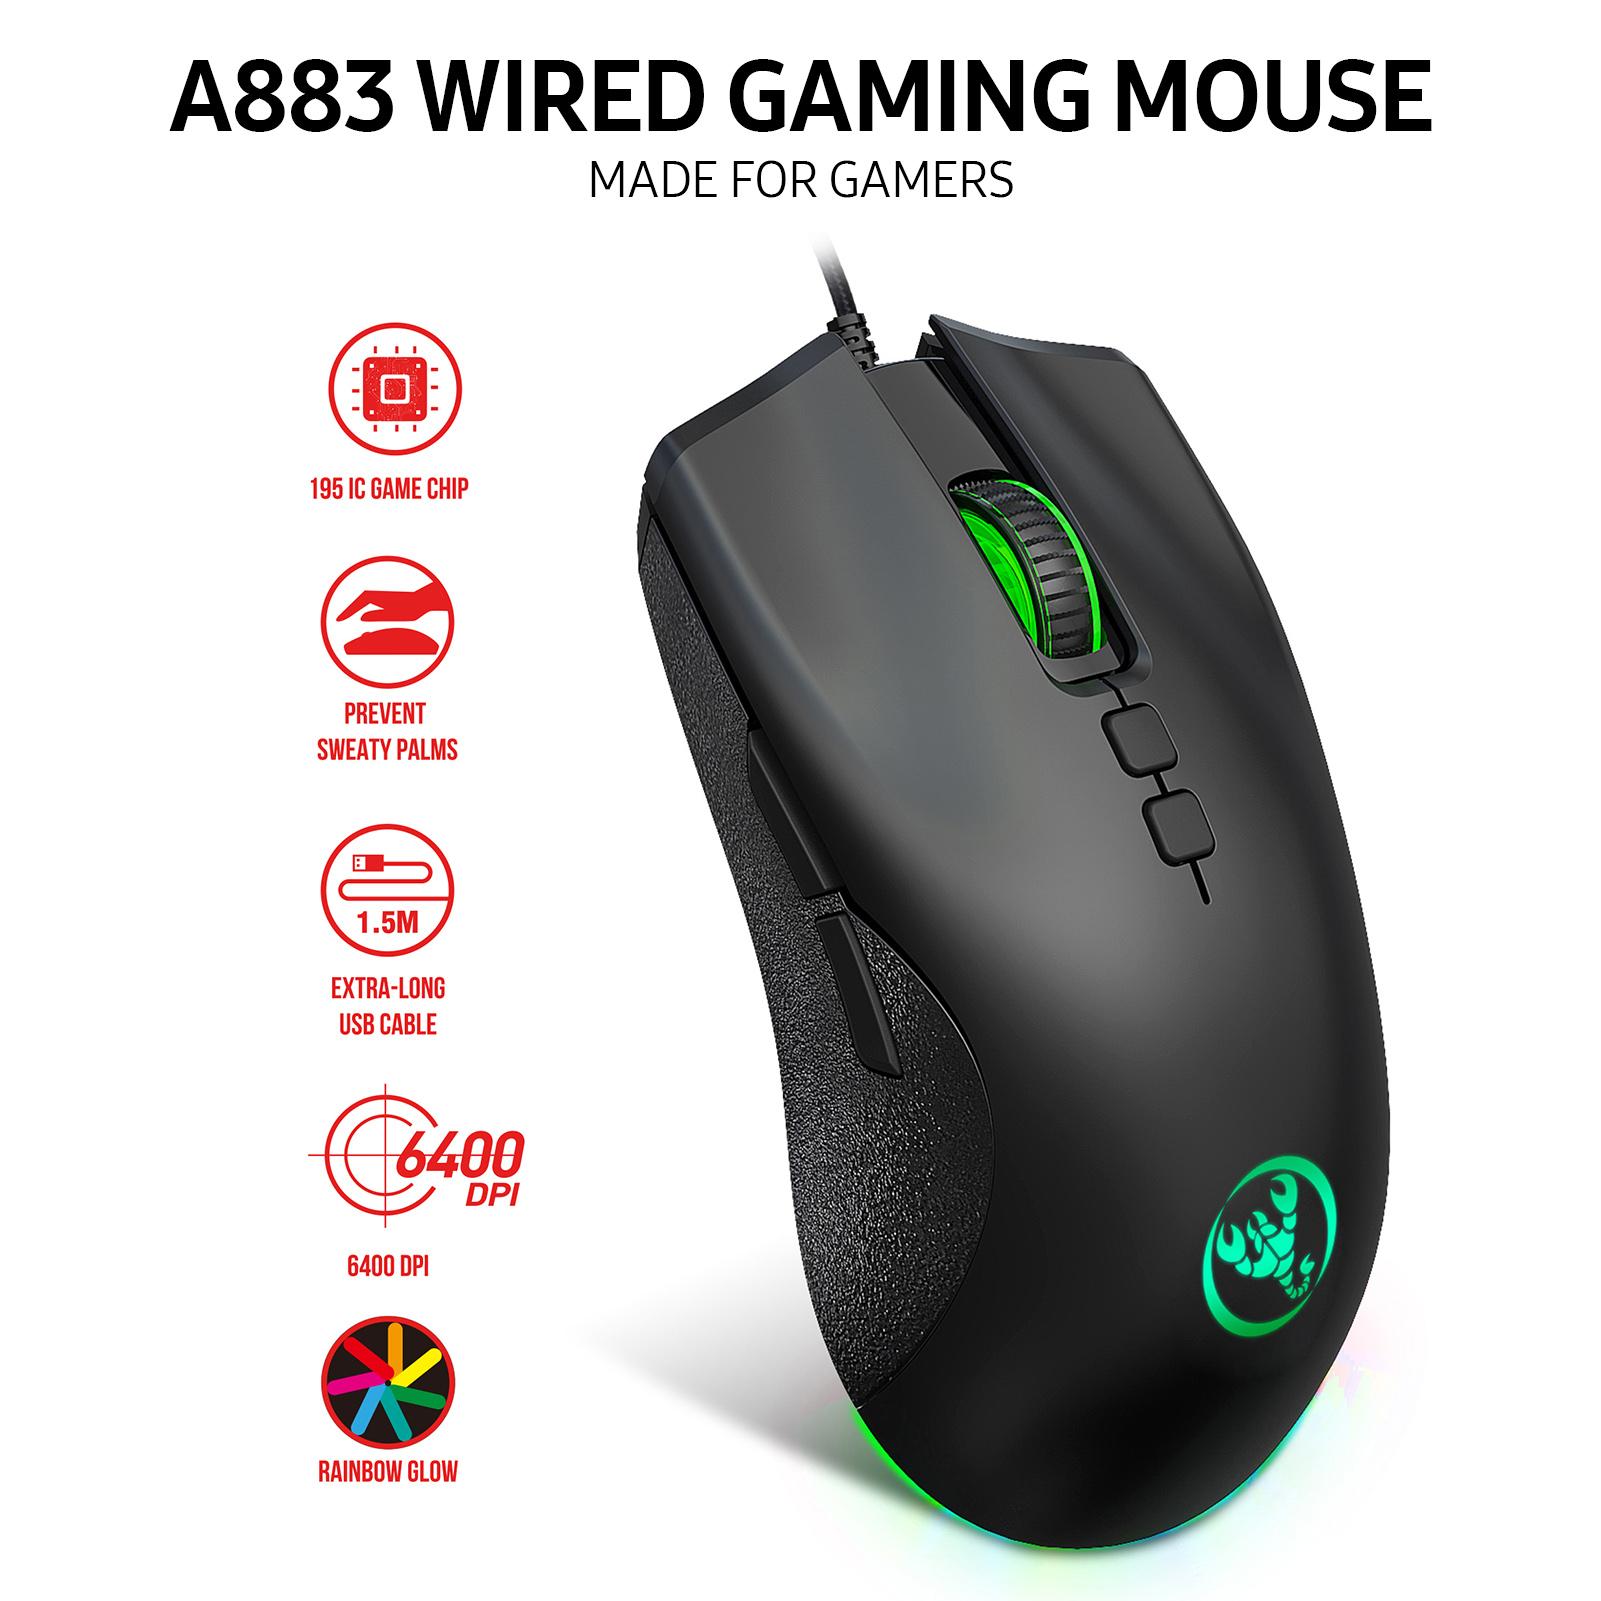 HXSJ A883 Wired Gaming Mouse 7 Buttons Gaming Mouse with Four-level Adjustable DPI Erogonomcic Design for Dsektop